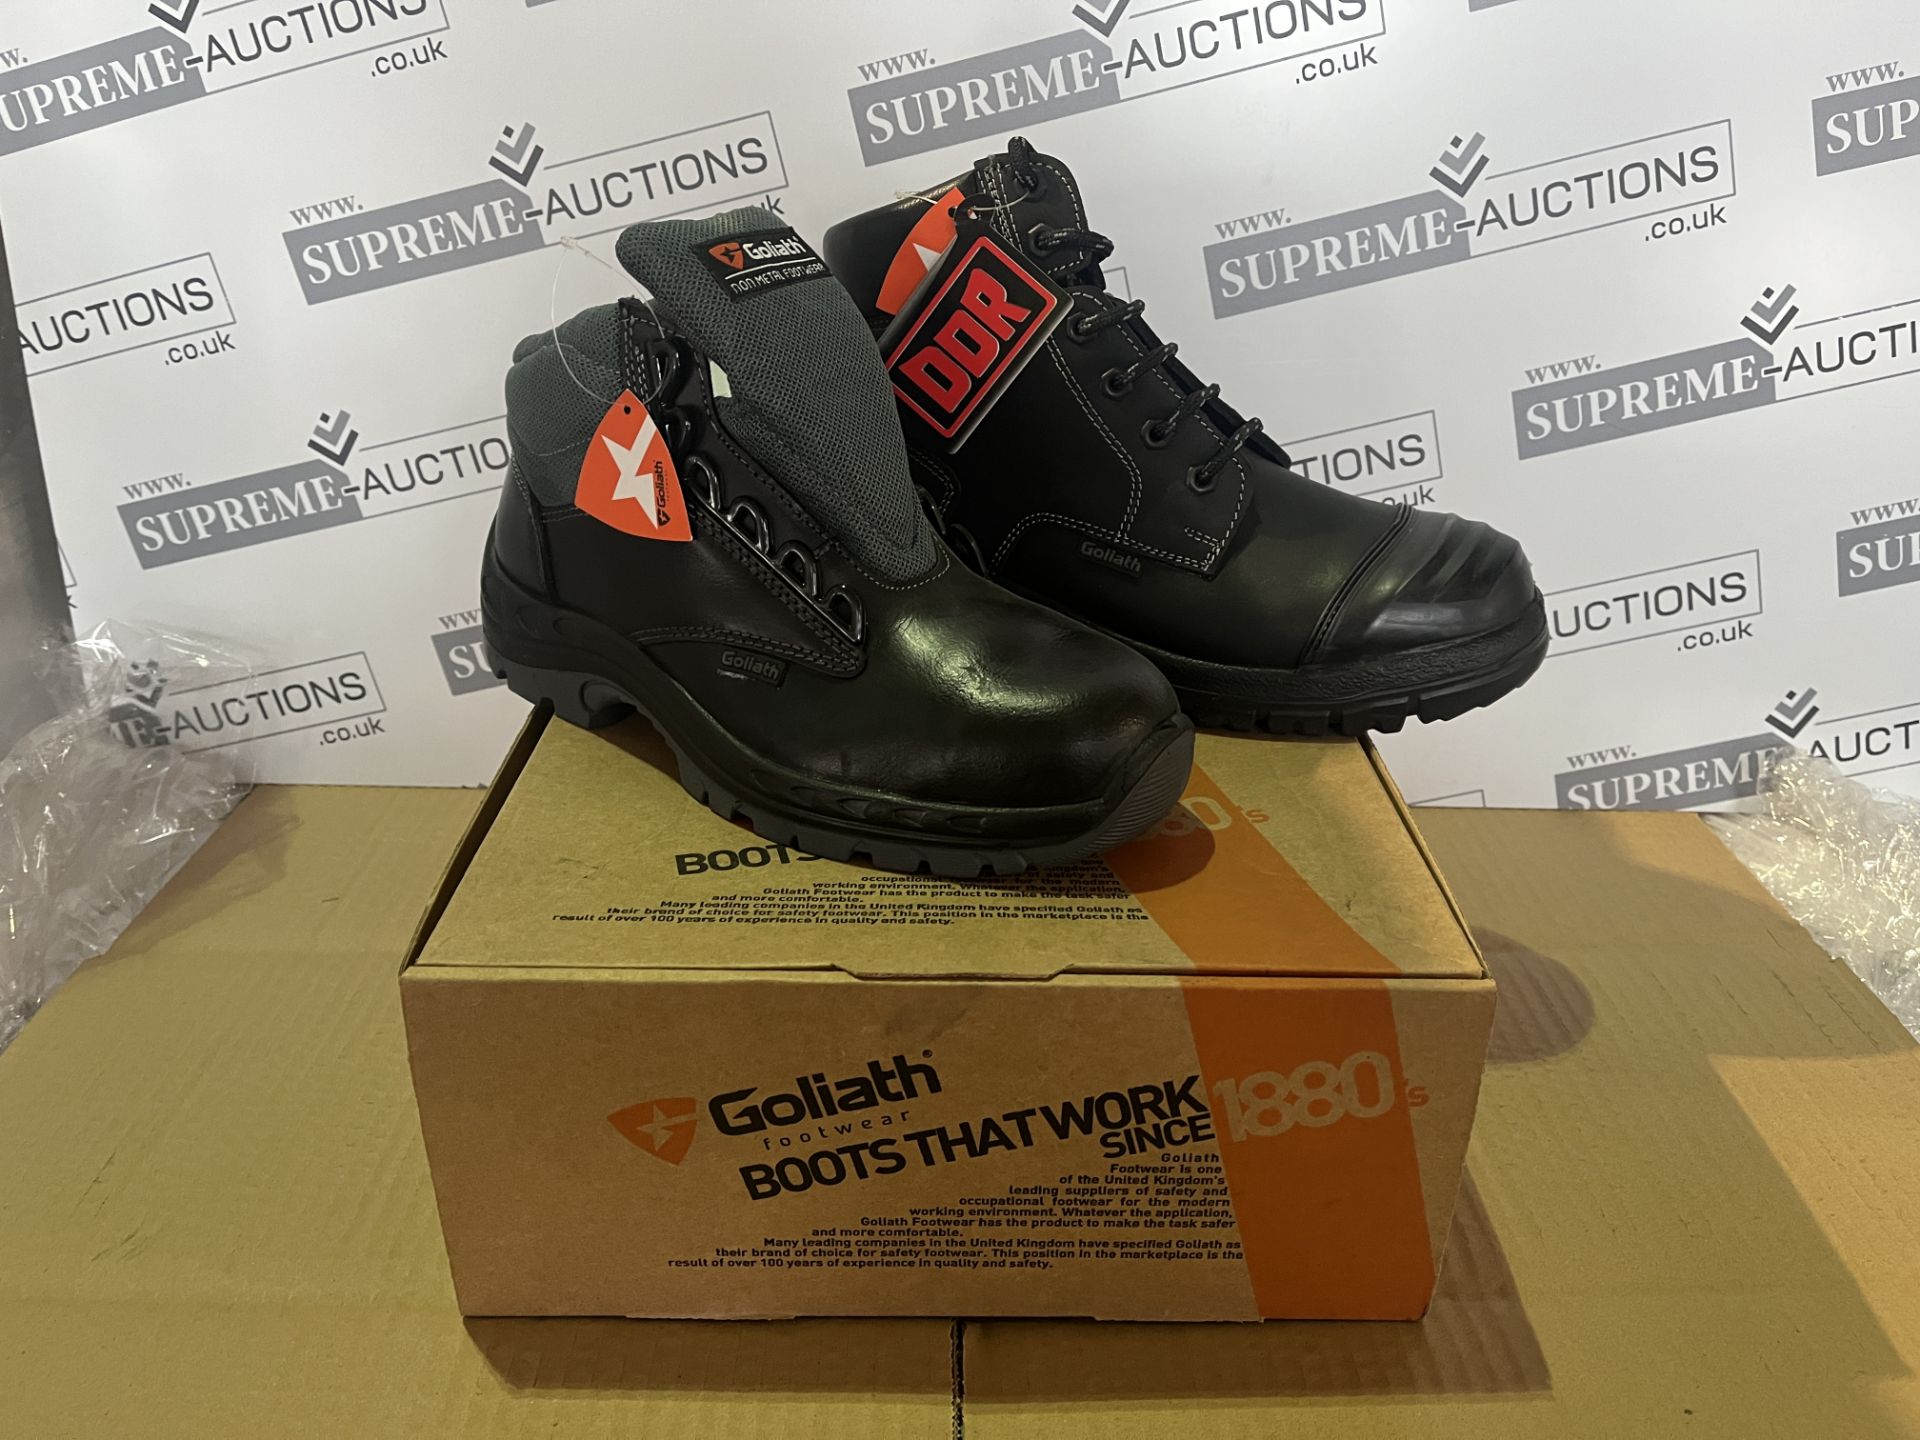 4 X BRAND NEW GOLIATH PROFESSIONAL WORK BOOTS IN VARIOUS STYLES AND SIZES R15-8